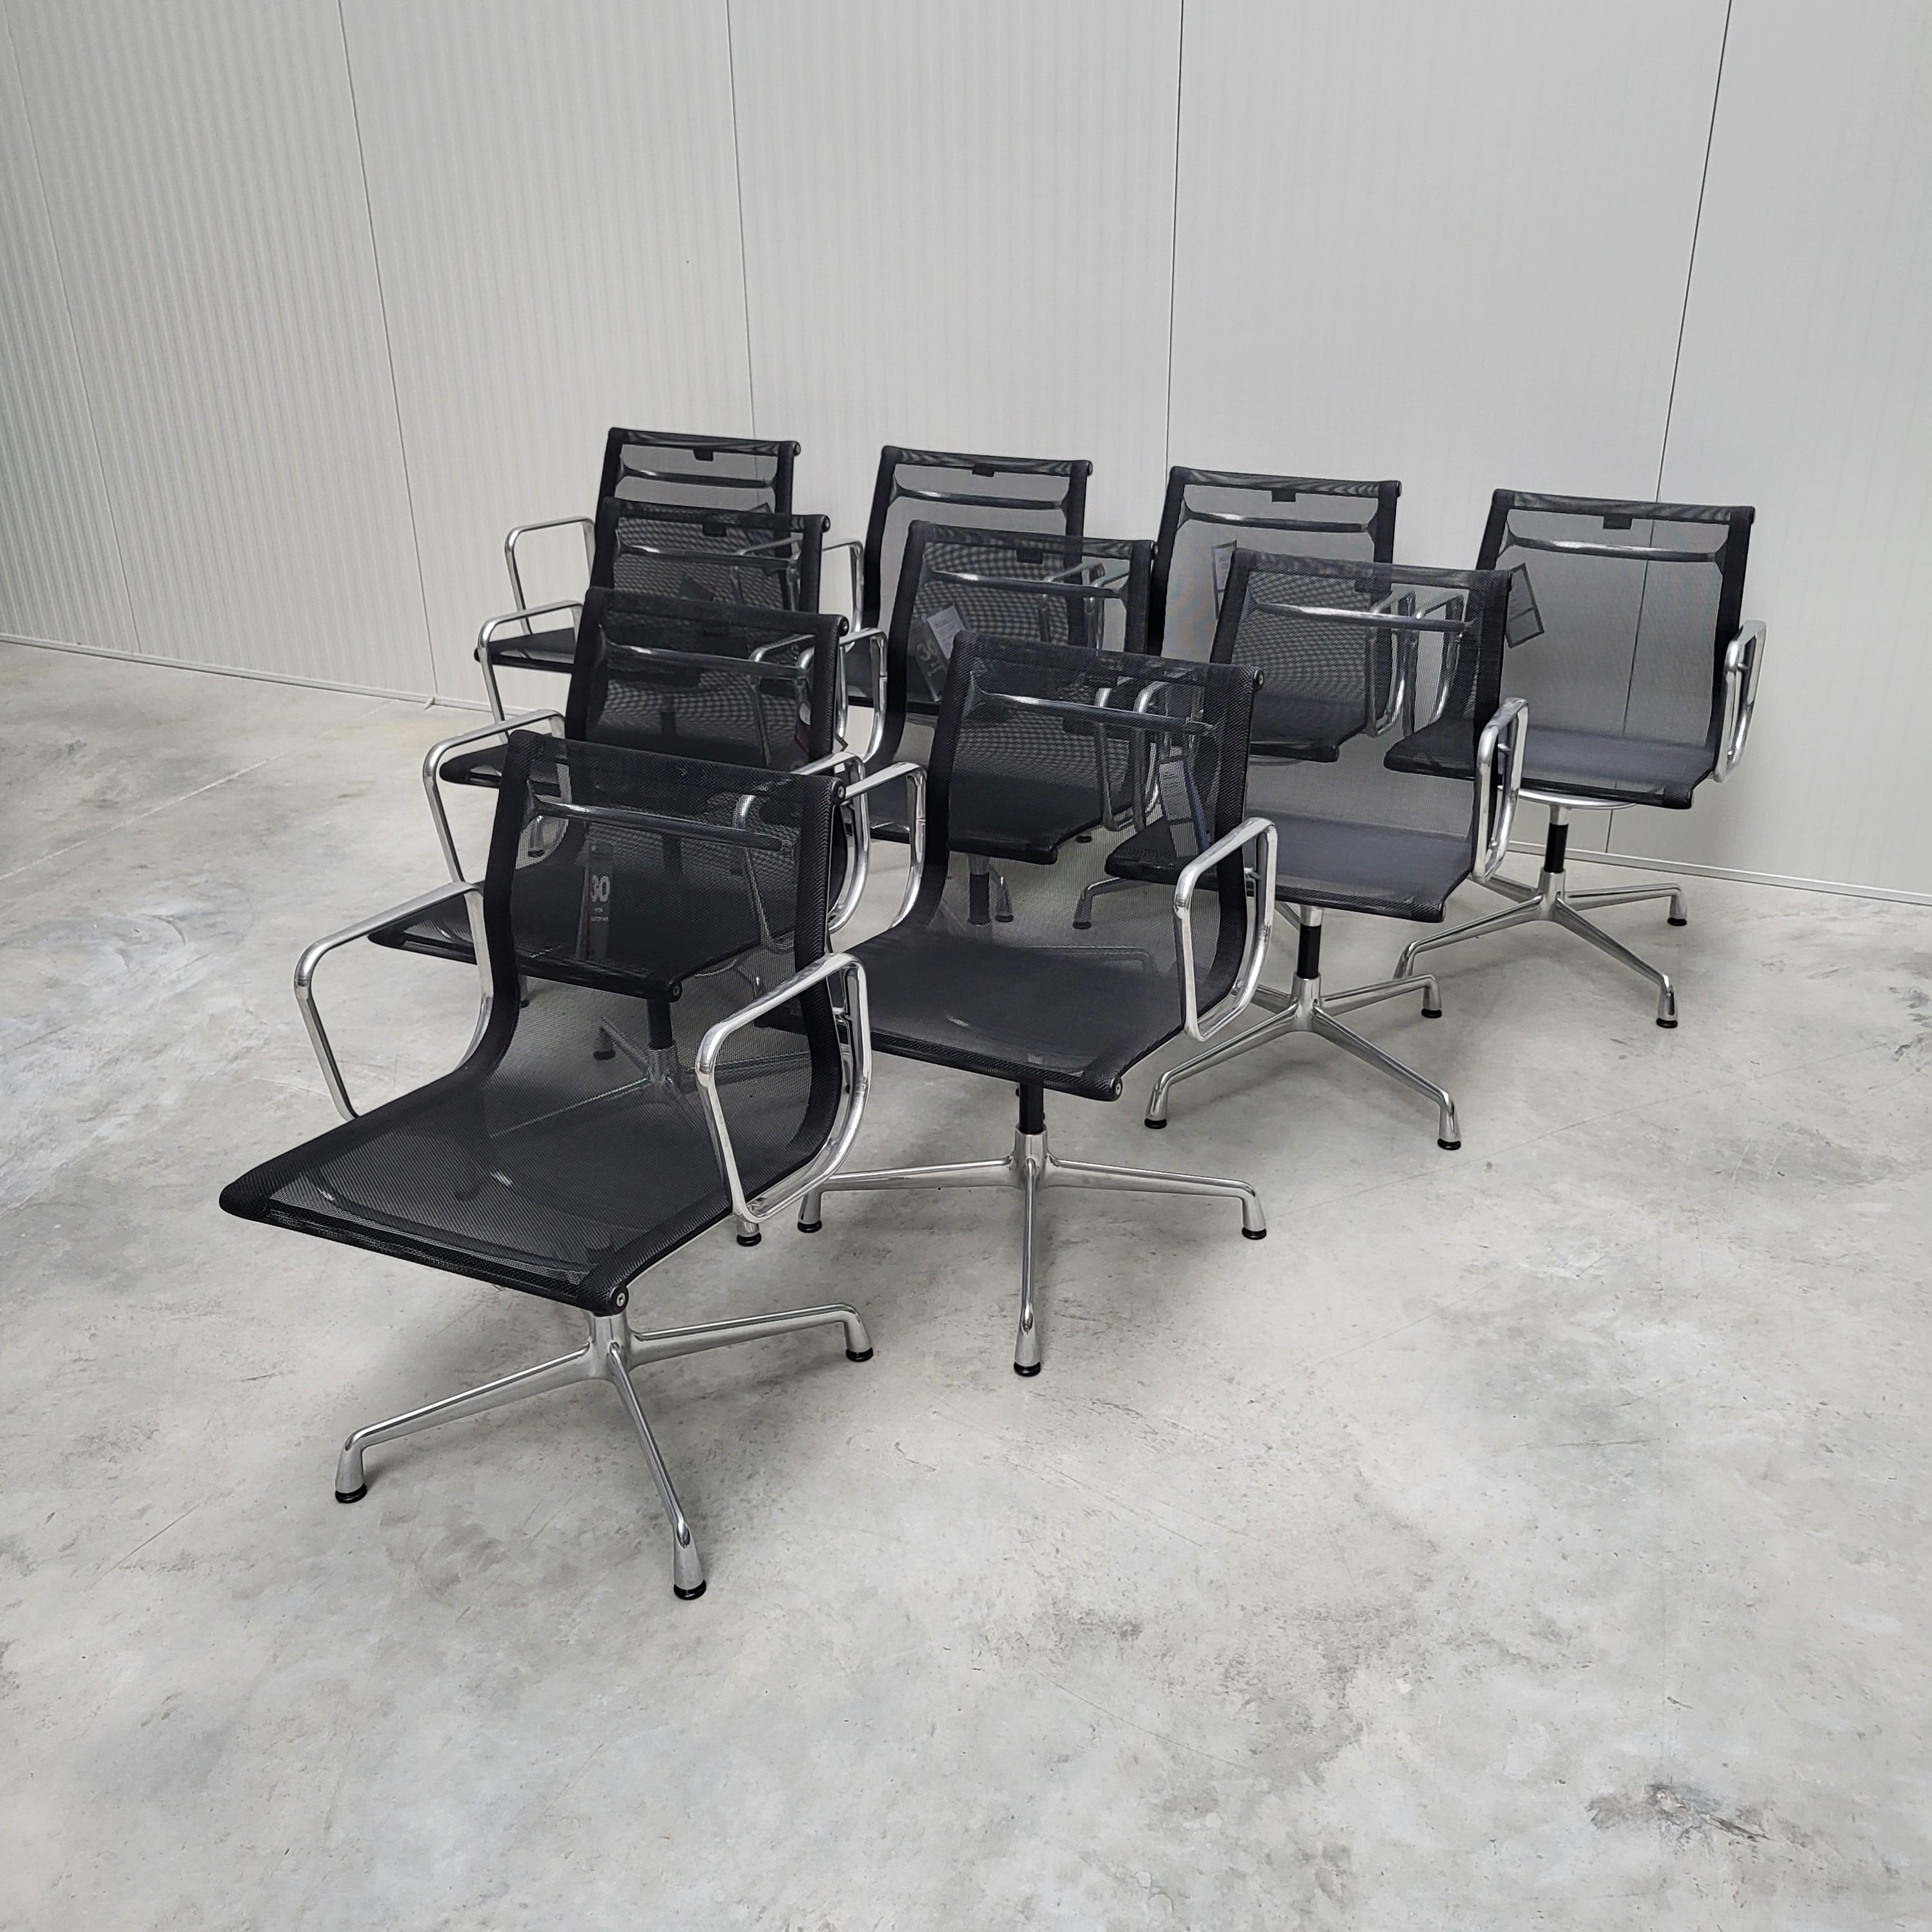 Nice set of 10 black netweave chairs model EA108 produced by Vitra. The chairs features a polished aluminium frame and are all made in 2015.

The set is perfect useable in a dining or conference room.
The new retail price for a single chair is